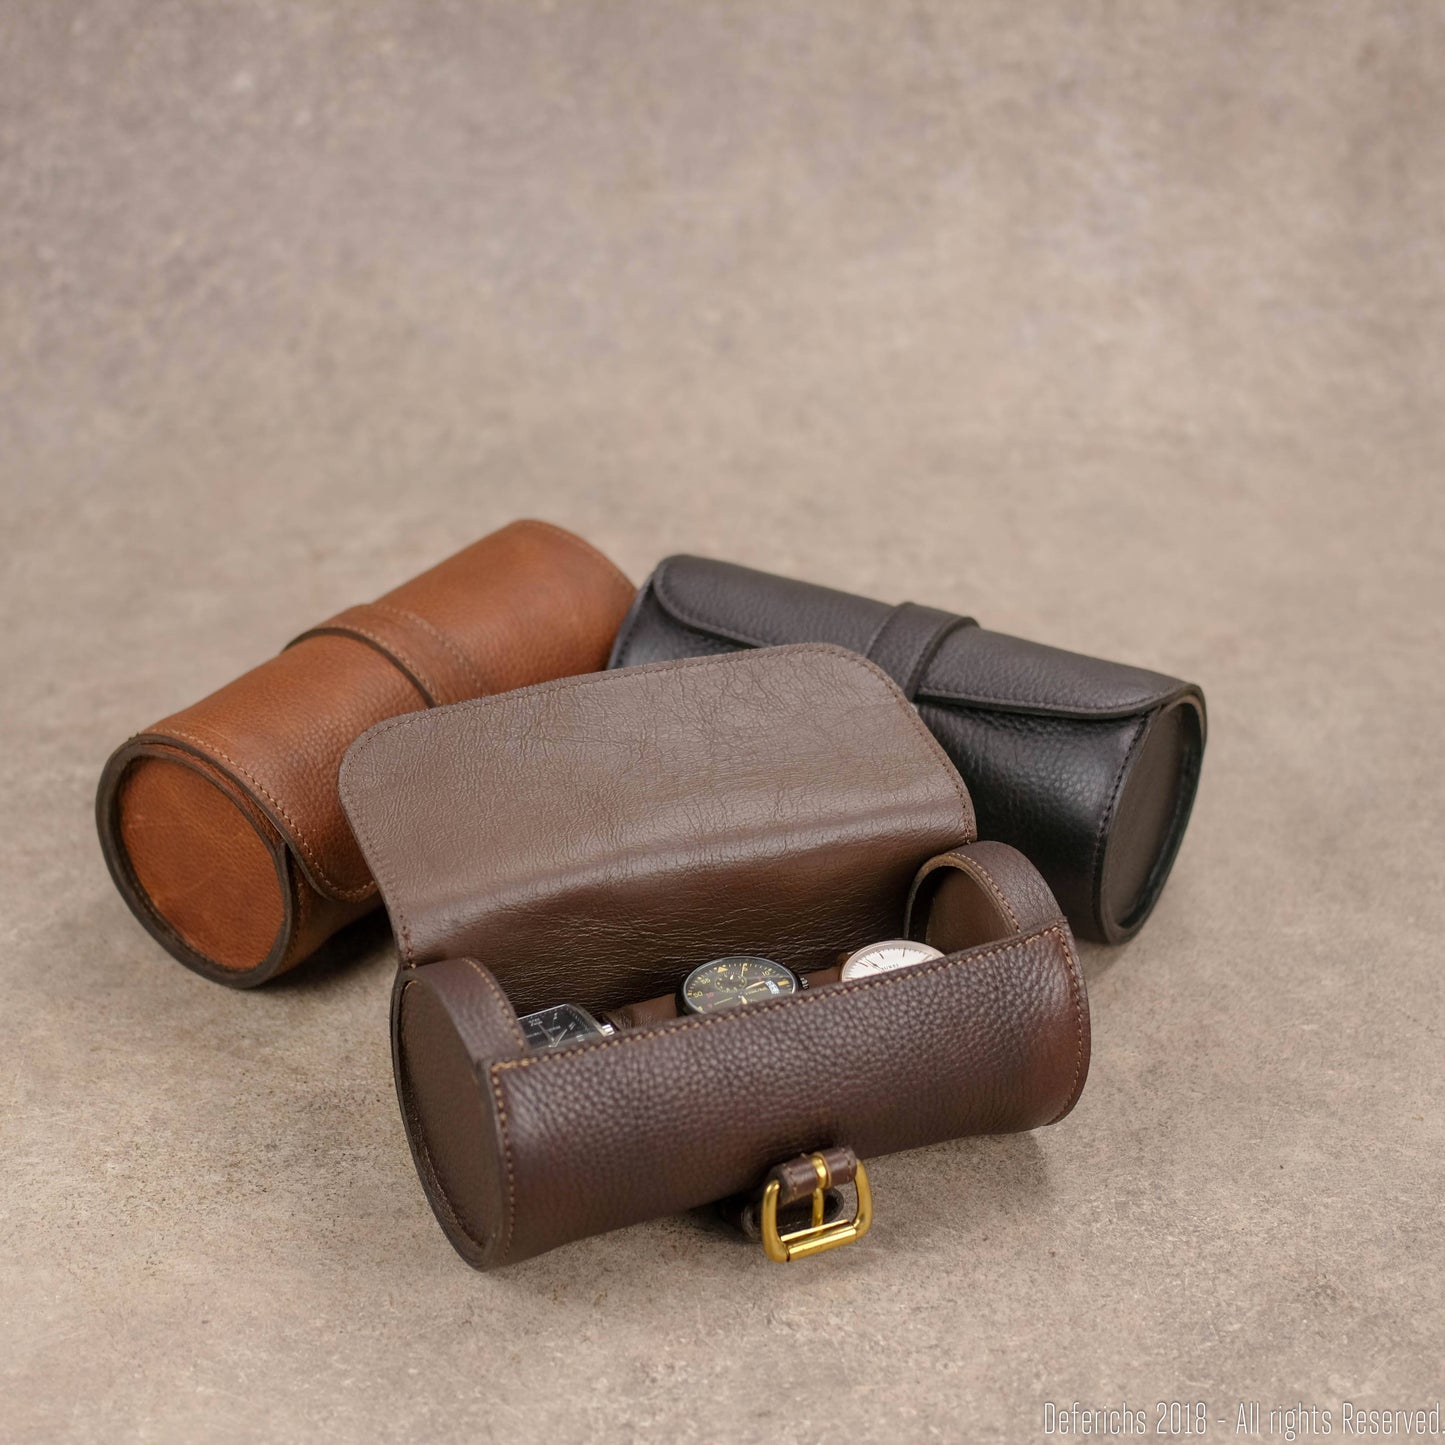 Leather Watch Case Roll for Travel. - Deferichs